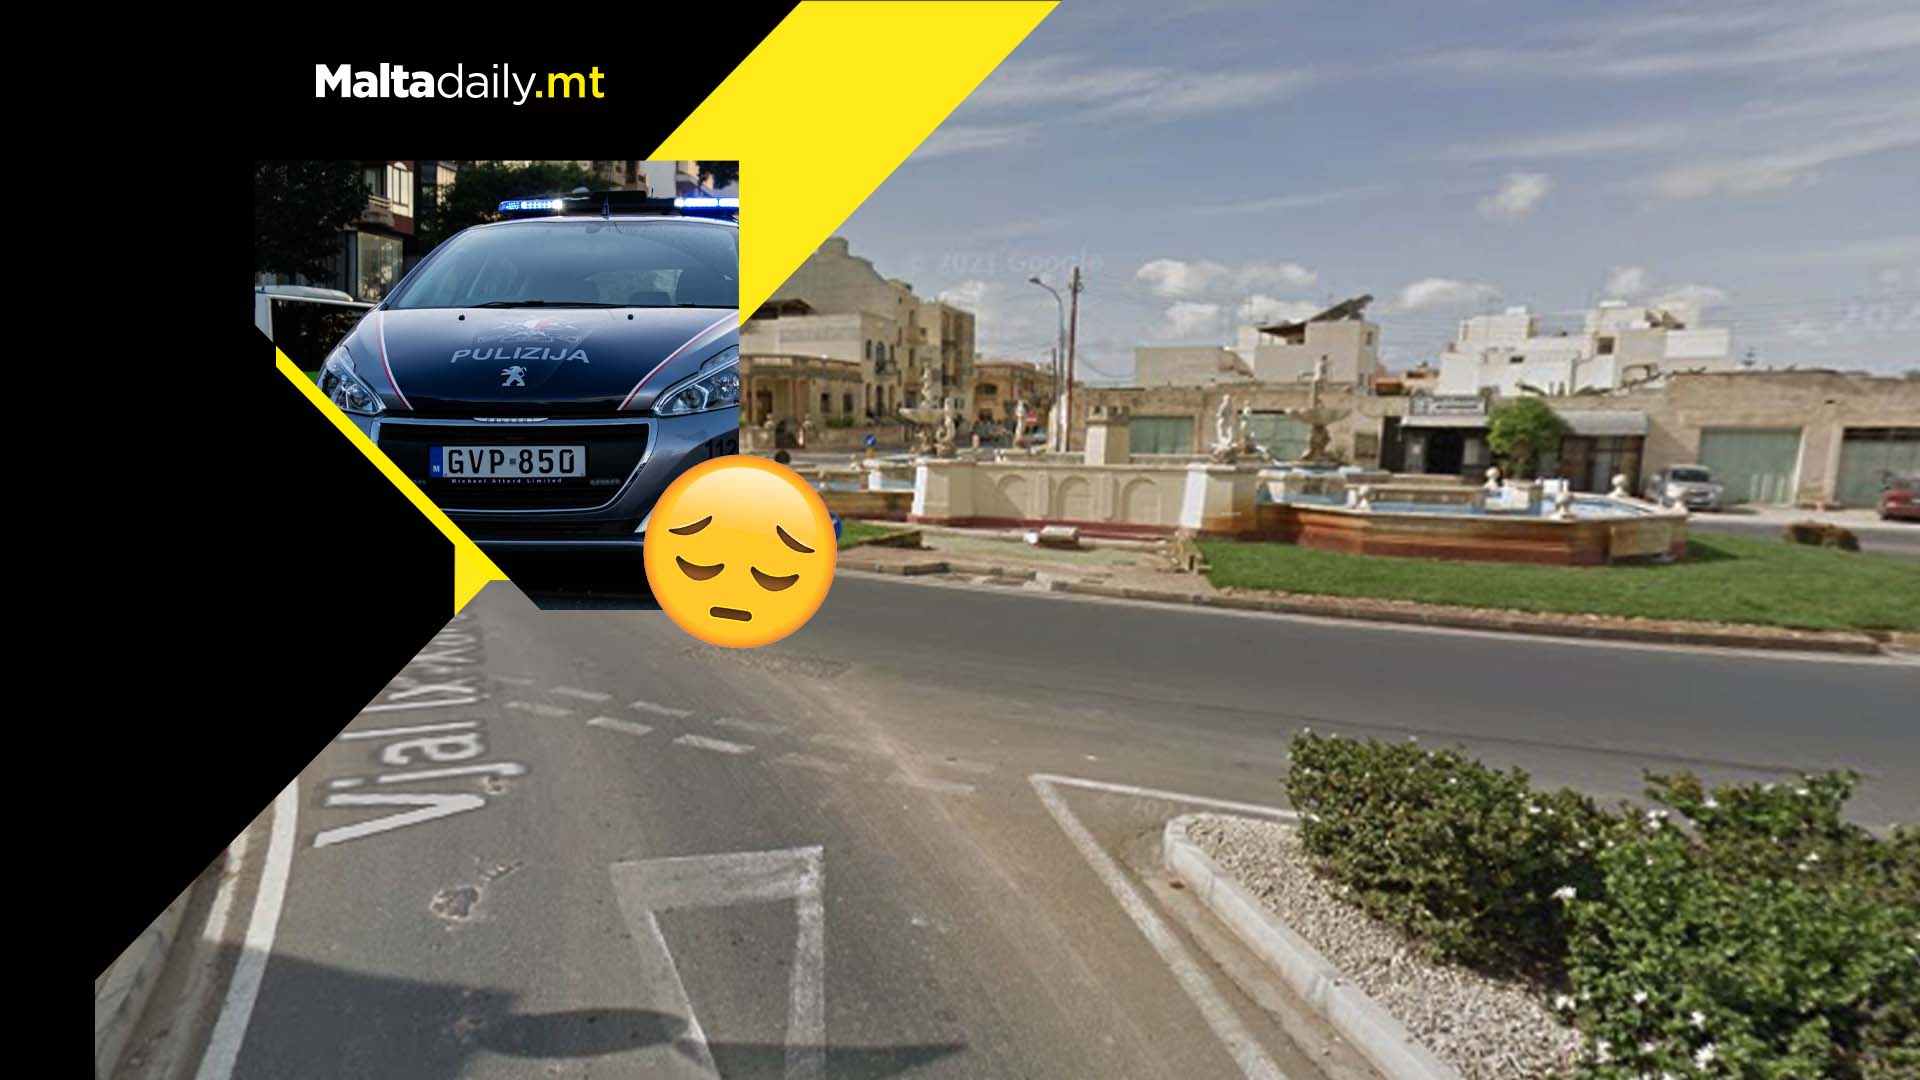 Żurrieq traffic incident leaves motorcyclist grievously injured